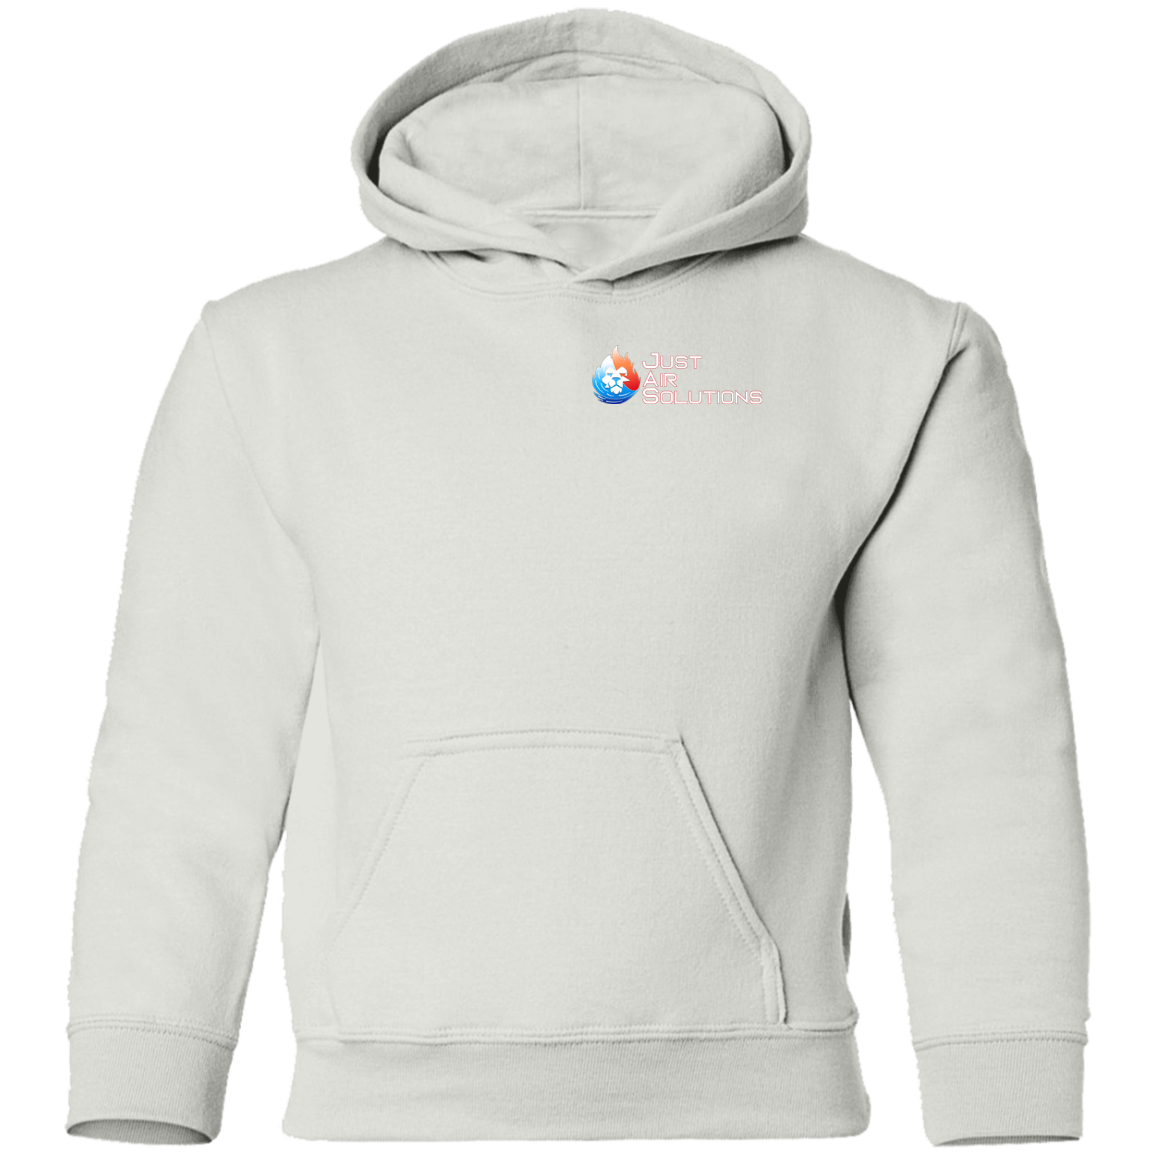 JAS - Youth Pullover Hoodie